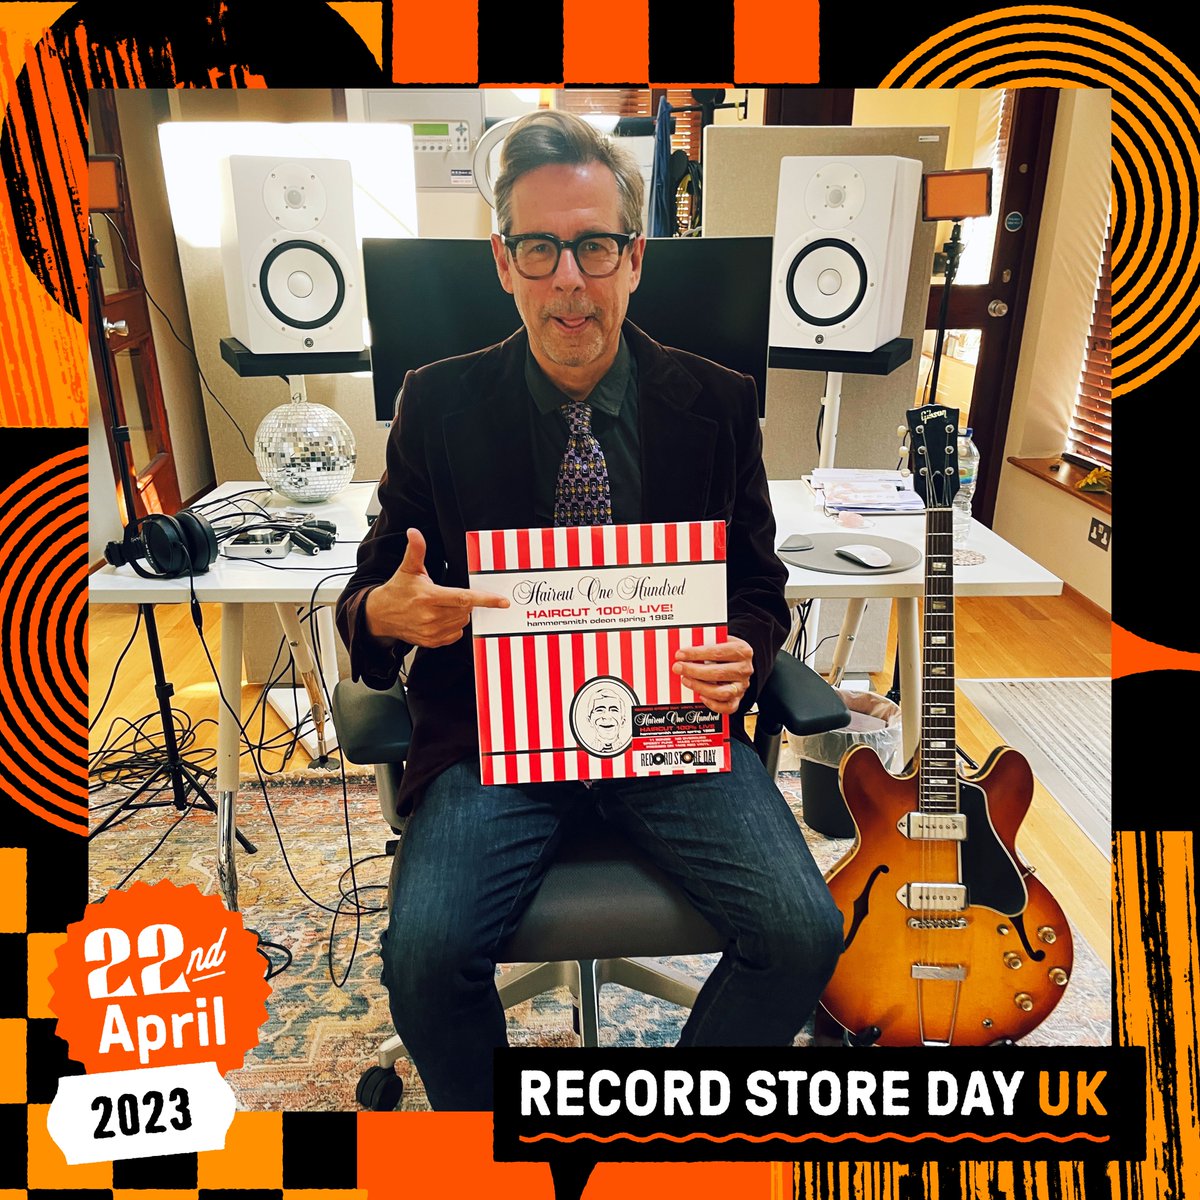 Countdown to #RSD23! @Haircut100 100% Live (Hammersmith Odeon 1982) features 11 tracks and is pressed on 140g red #vinyl. Available on LP for the first and only time! The inner bag contains snapshots taken at the Hammersmith gig! #recordstoreday2023 @RSDUK @recordstoreday